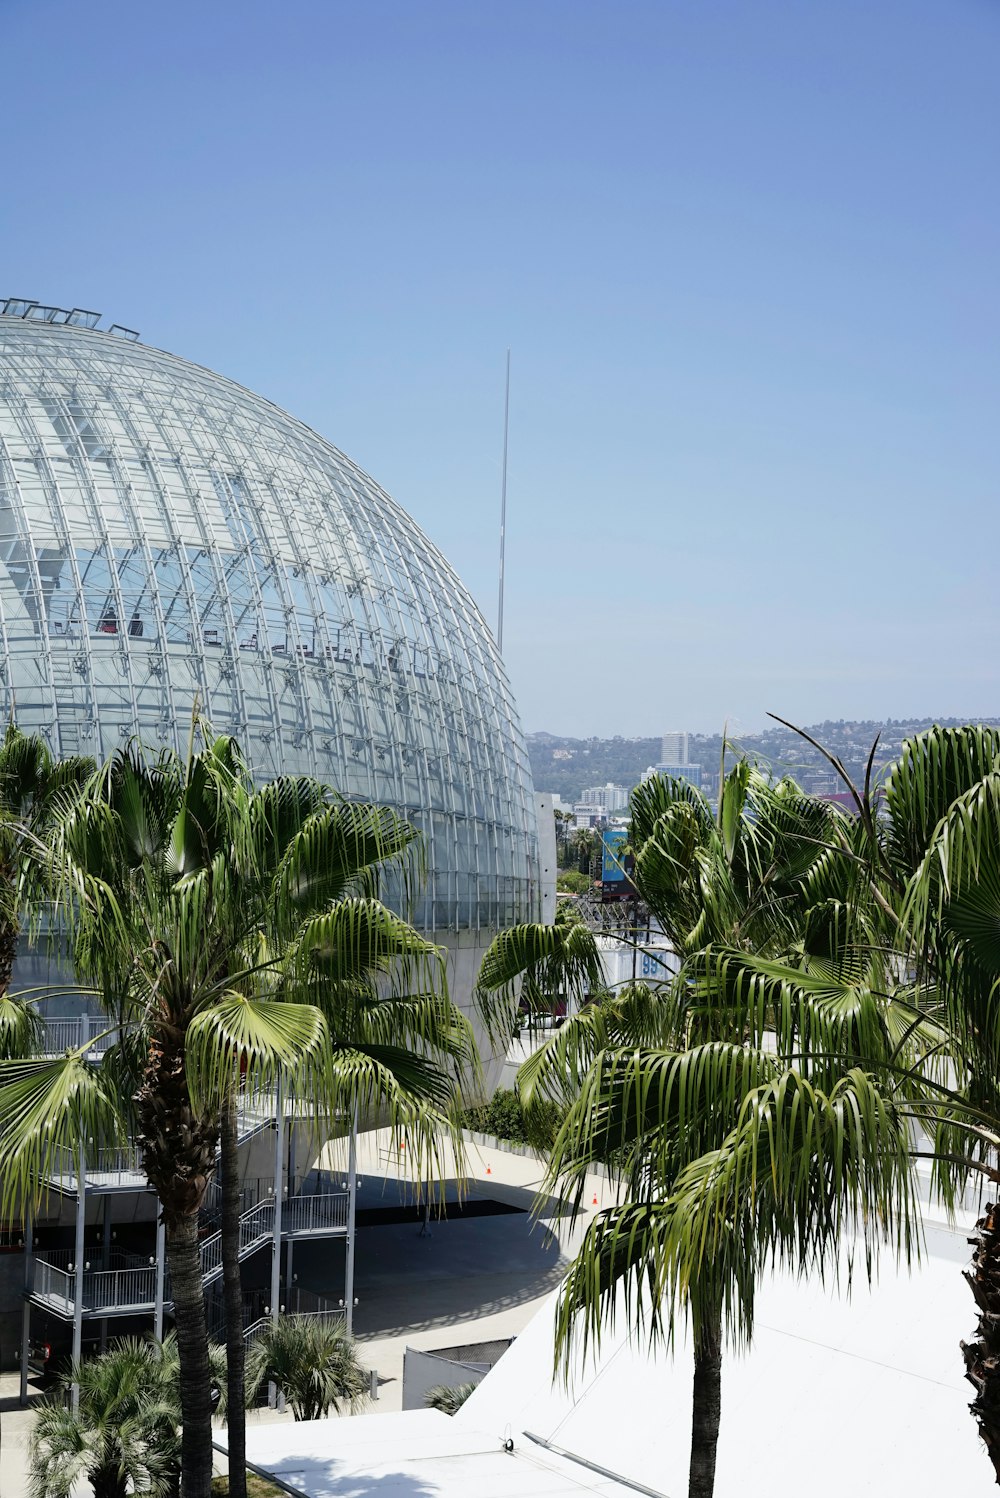 palm trees in front of a large glass dome